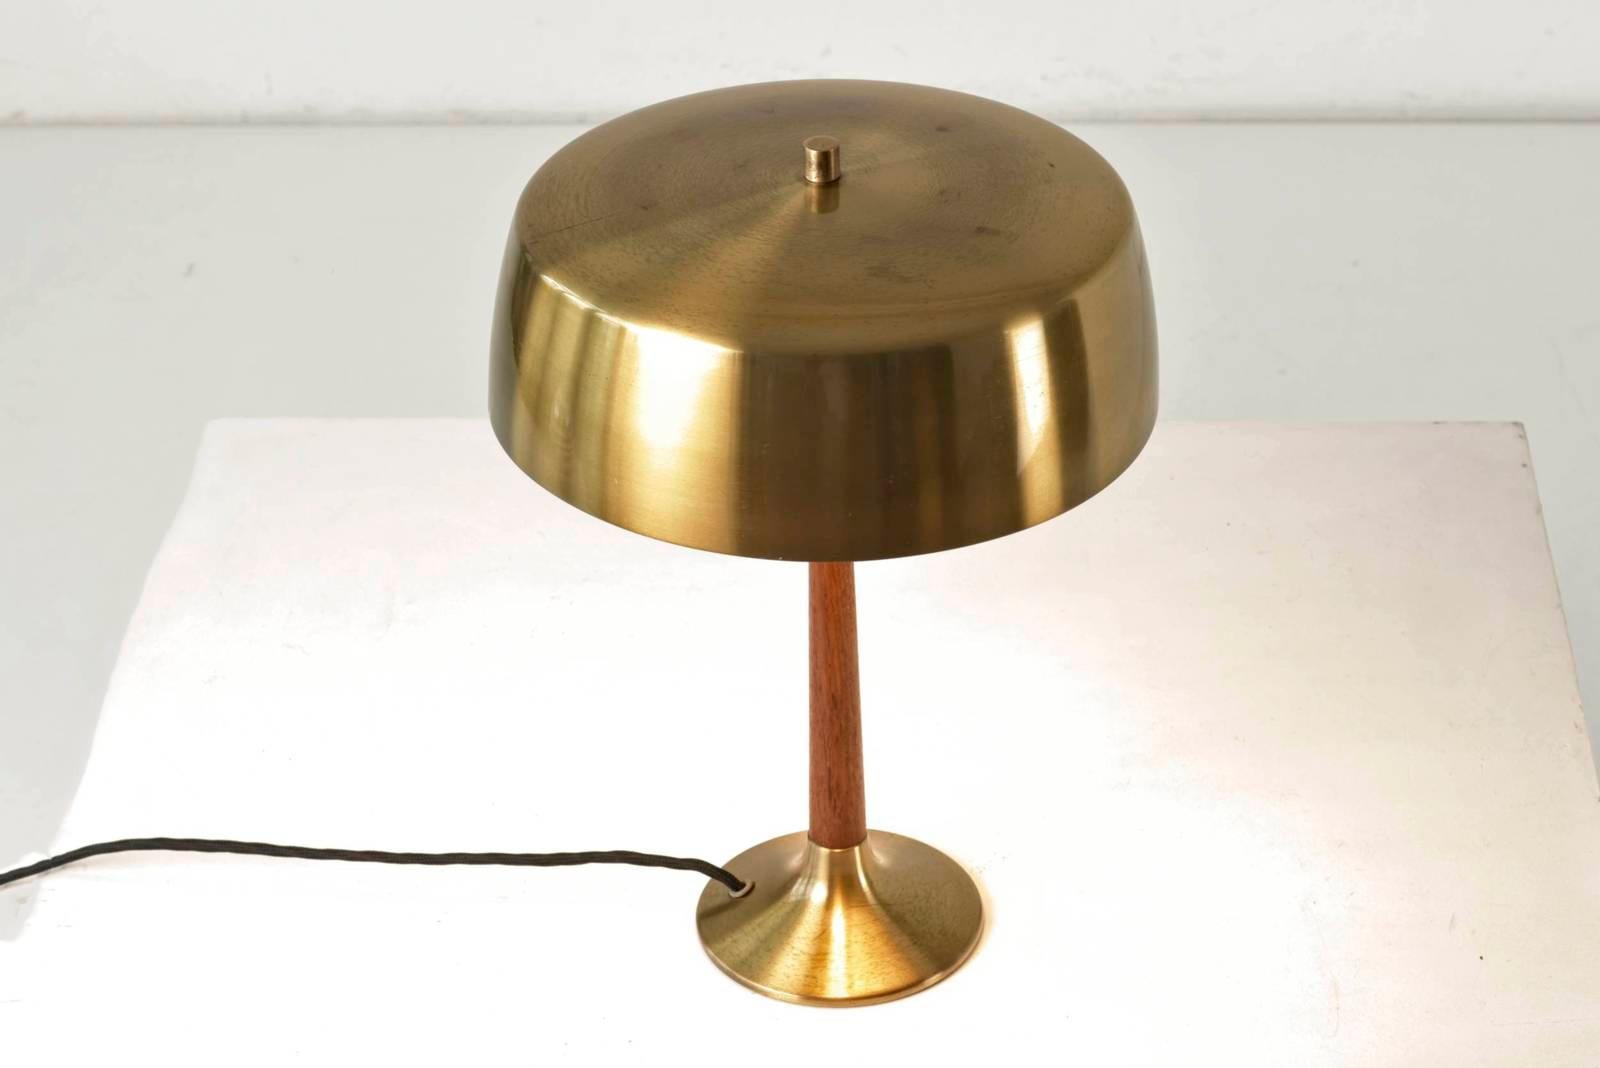 Mid-Century Modern Table Lamp 41101 by Svend Aage Holm-Sørensen in Brass and Teak, Denmark - 1965 For Sale